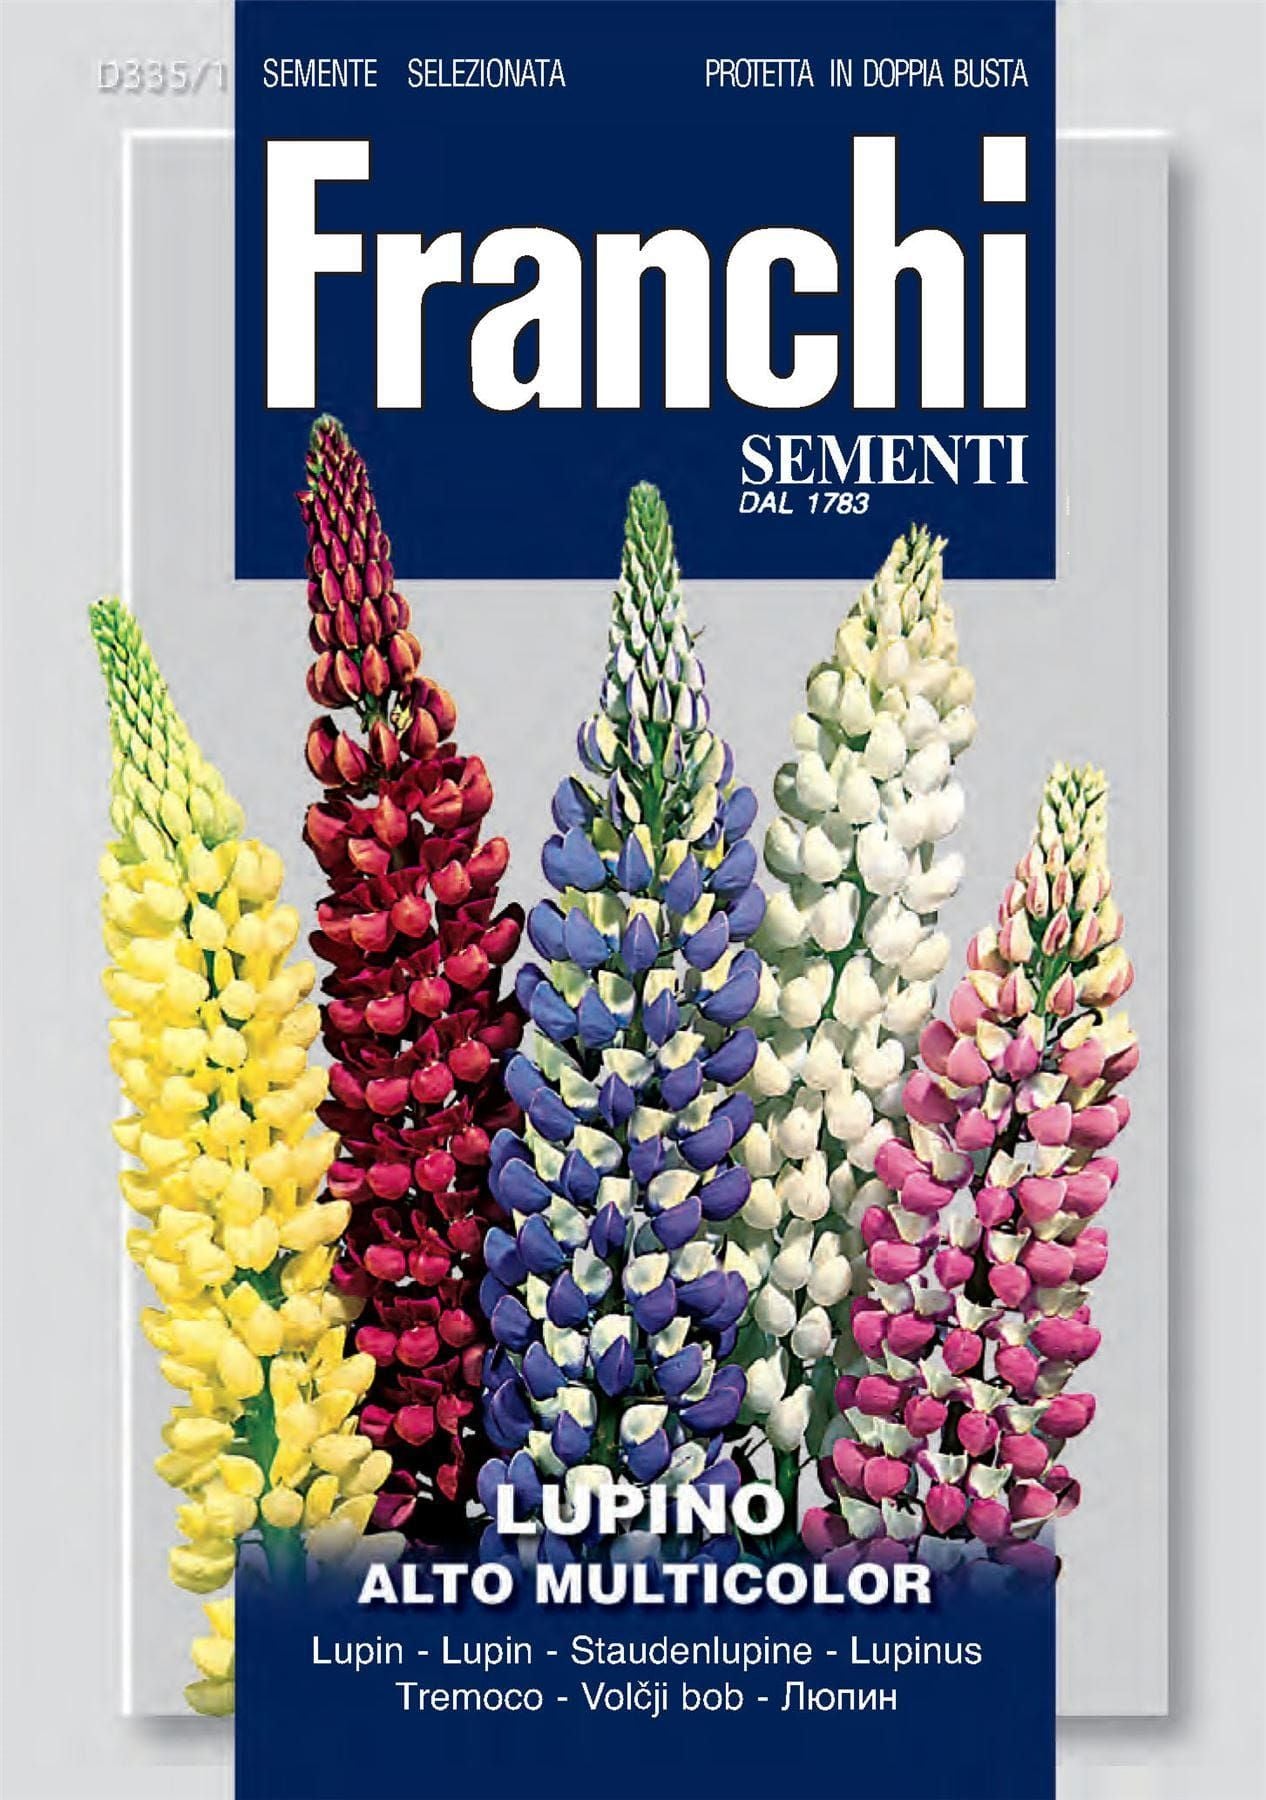 Franchi Seeds of Italy - Flower - FDBF_ 335-1 - Lupin - alto Multicolour - Seeds